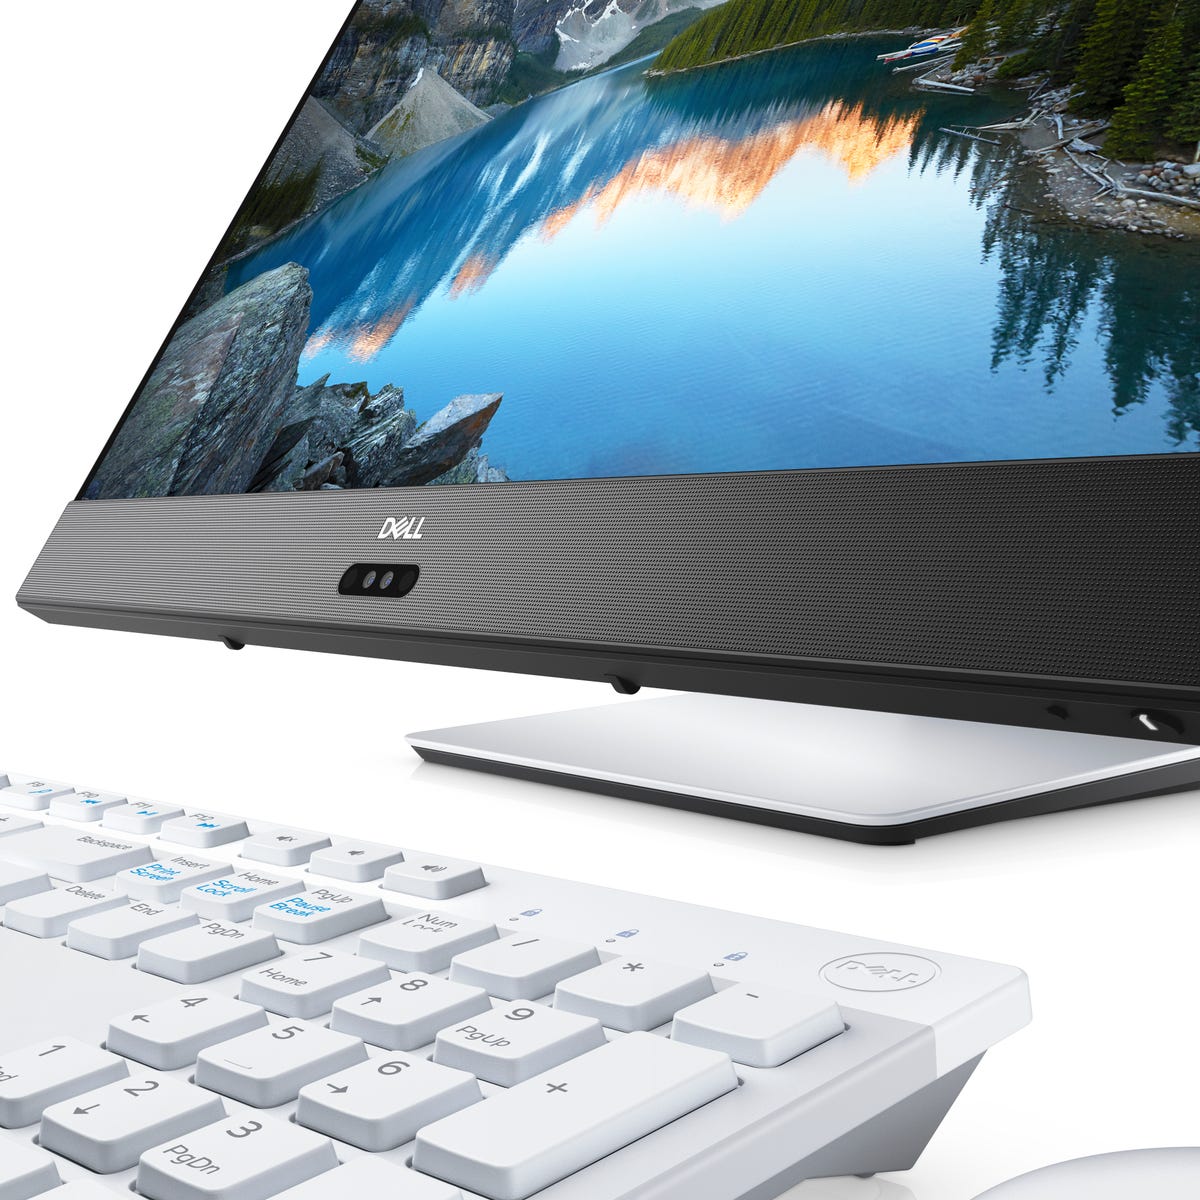 Dell brings its biggest design gaffe to sleeker budget AIOs - CNET